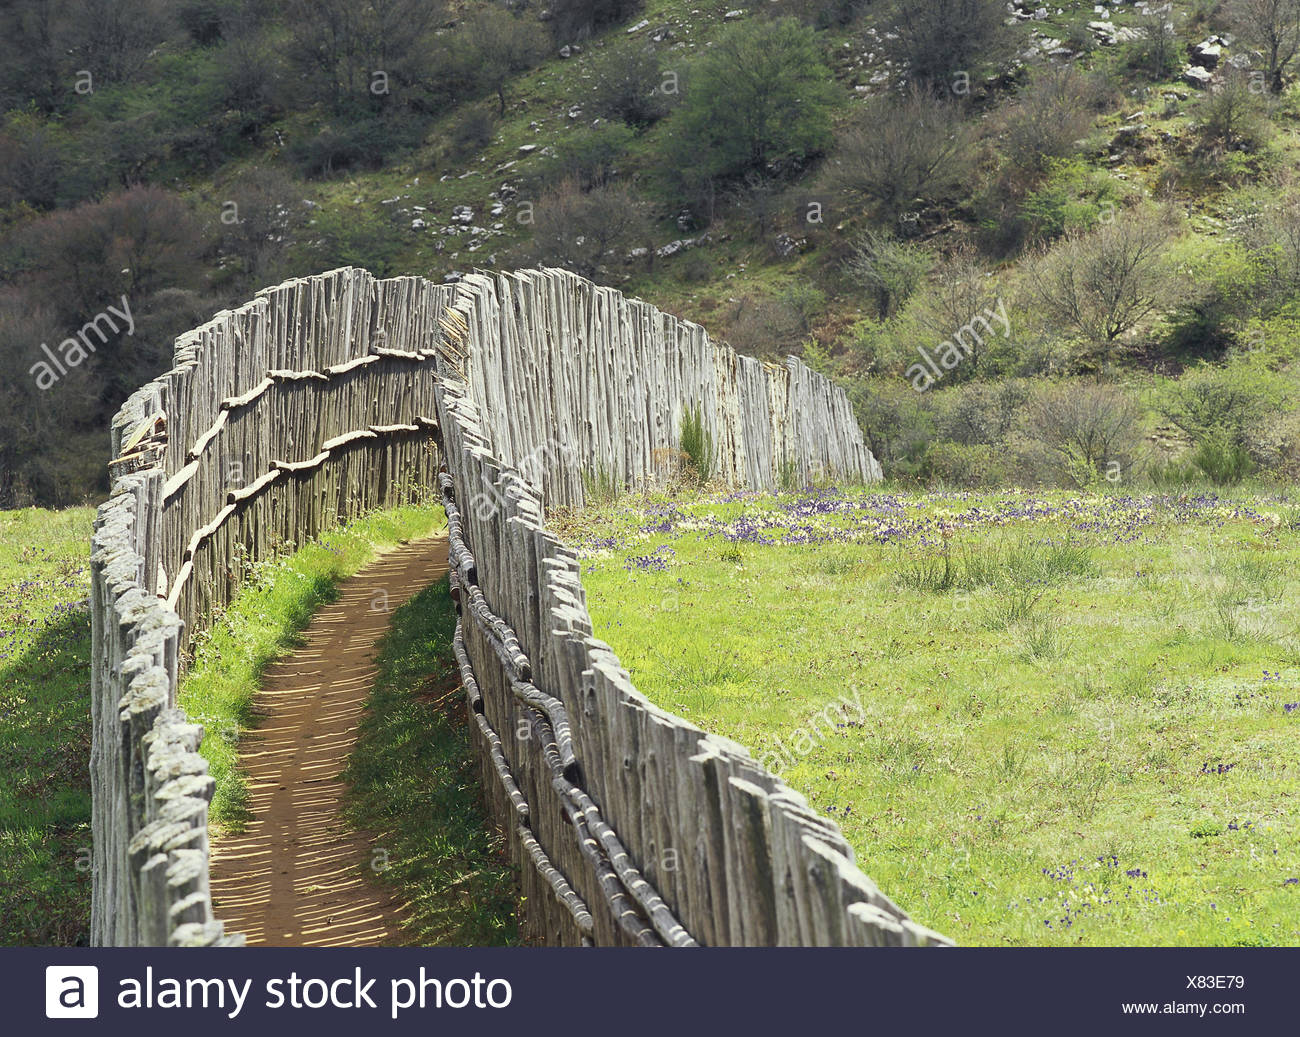 Italy, Tuscany, region Monte Amiata, nature reserve, Parco Faunistico, way,  fence, nature, park, game park, animal park, nature conservation,  enclosure, habitat, protection, enclosure, game enclosure, wooden fence,  palisade trench, closely, narrowly ...